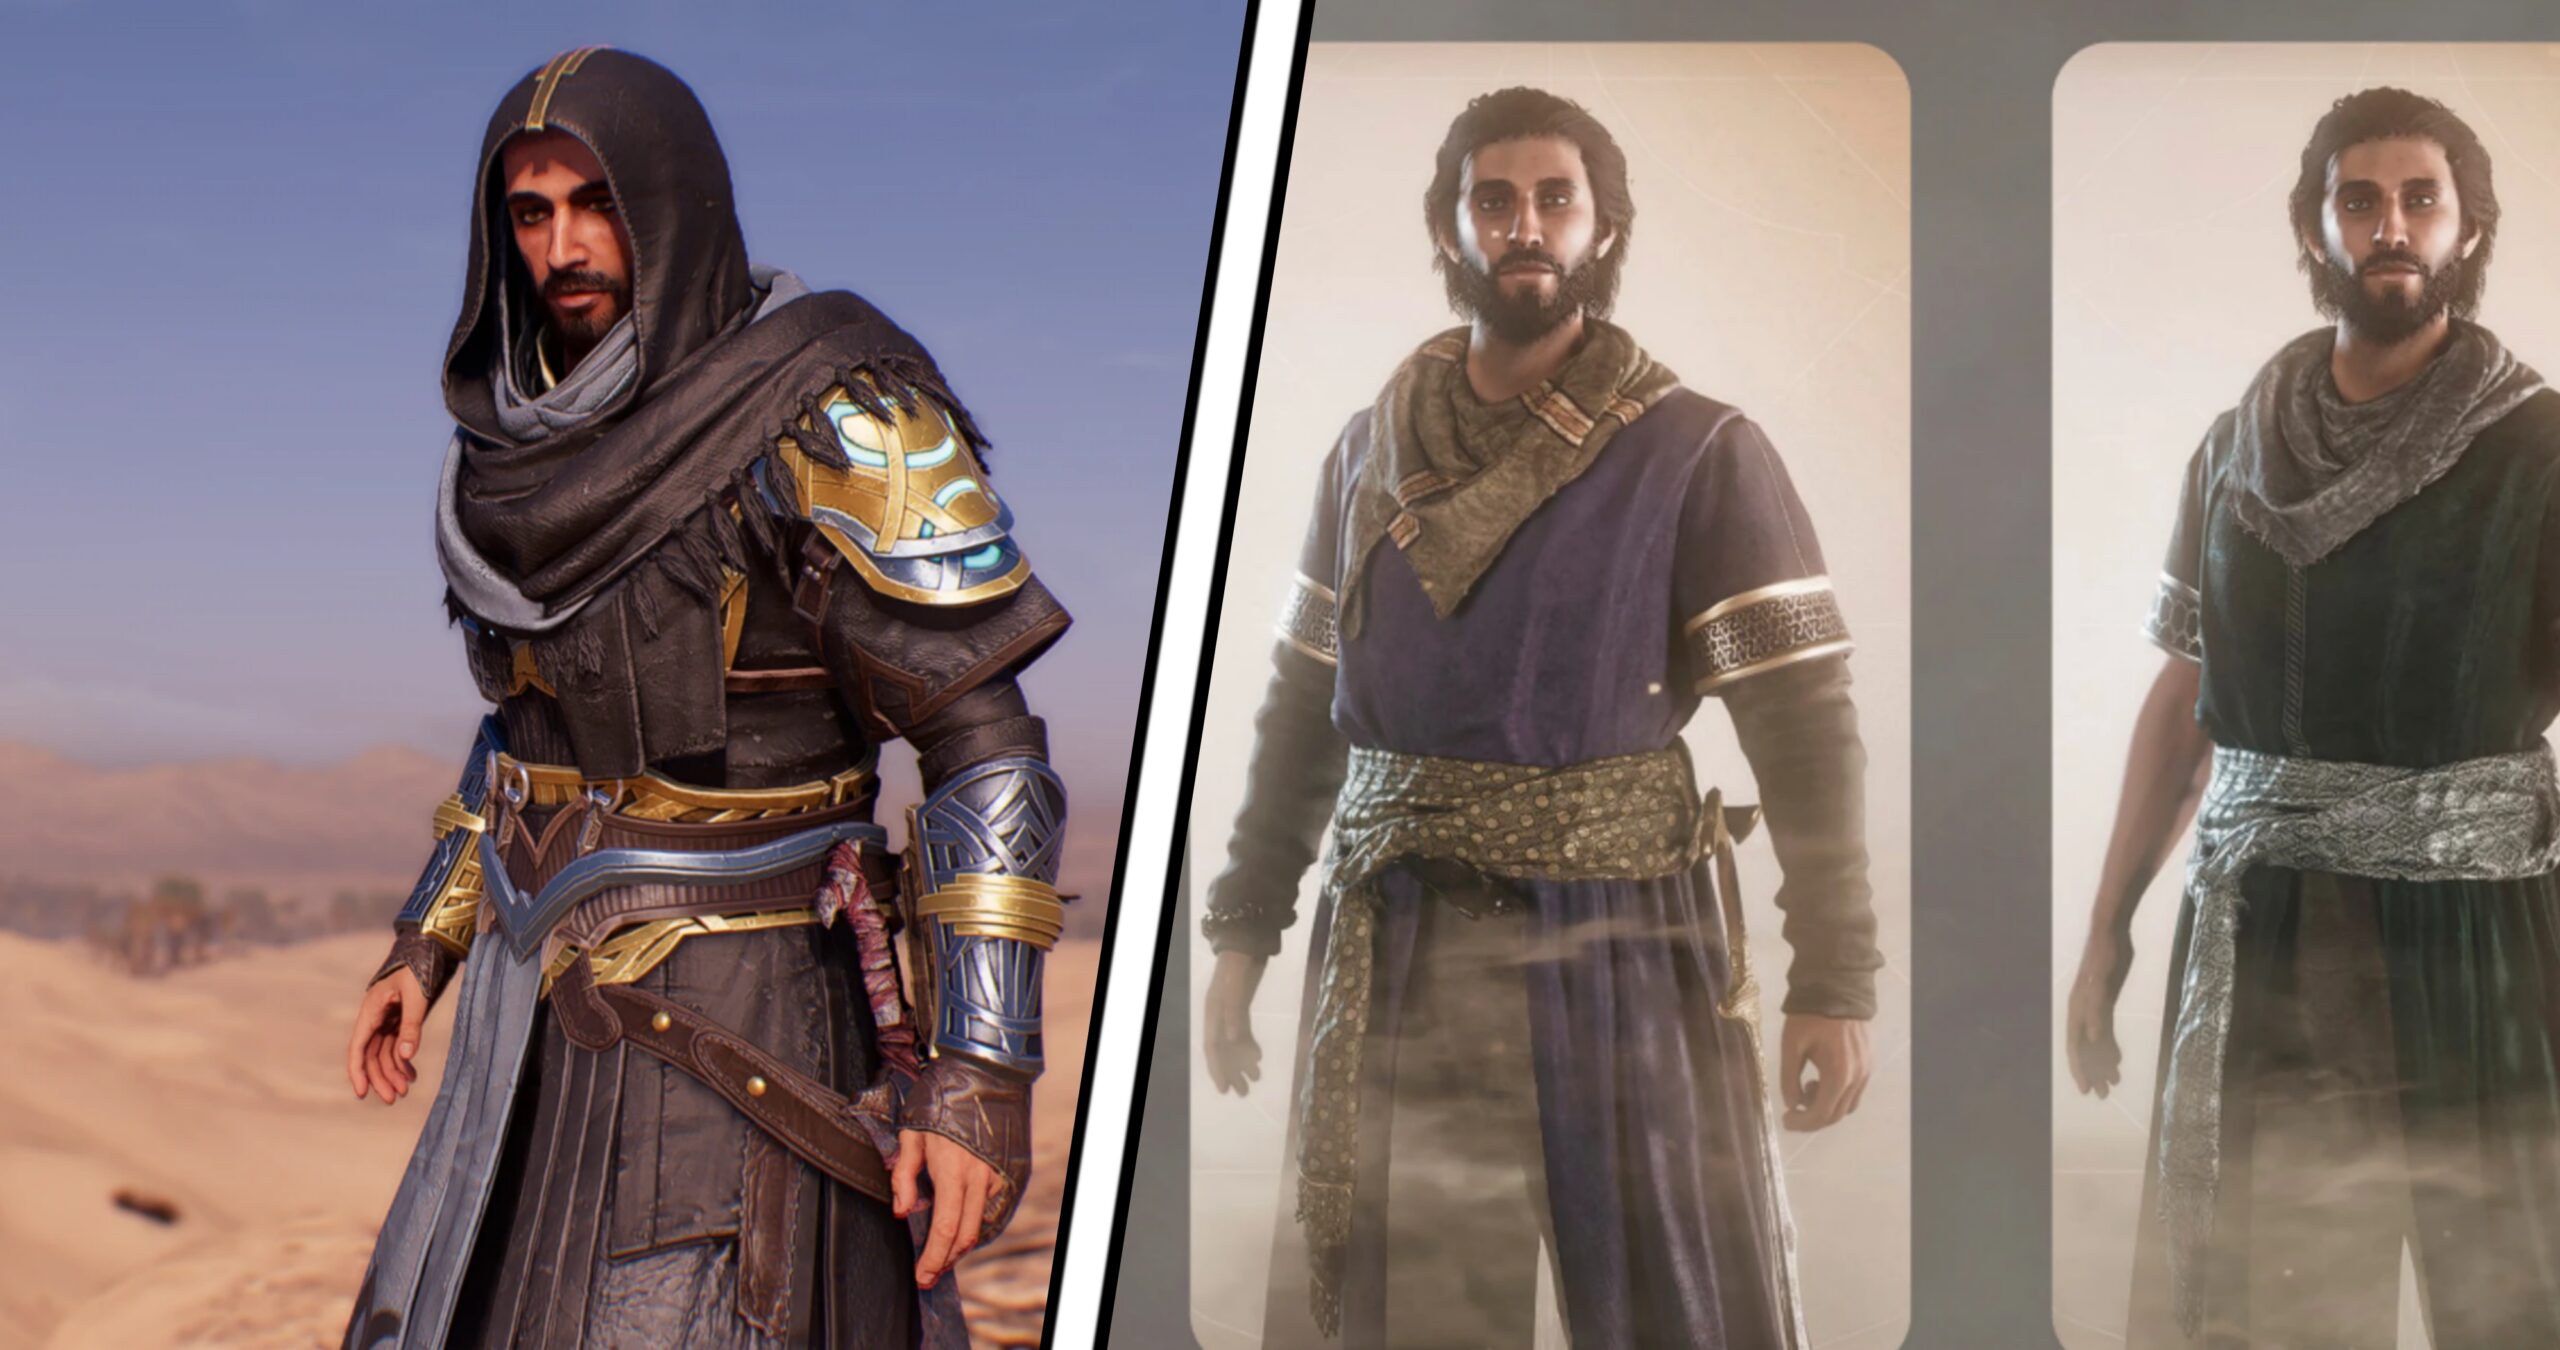 The Top 10 Best PC Mods for Assassin’s Creed Mirage Ranked cover